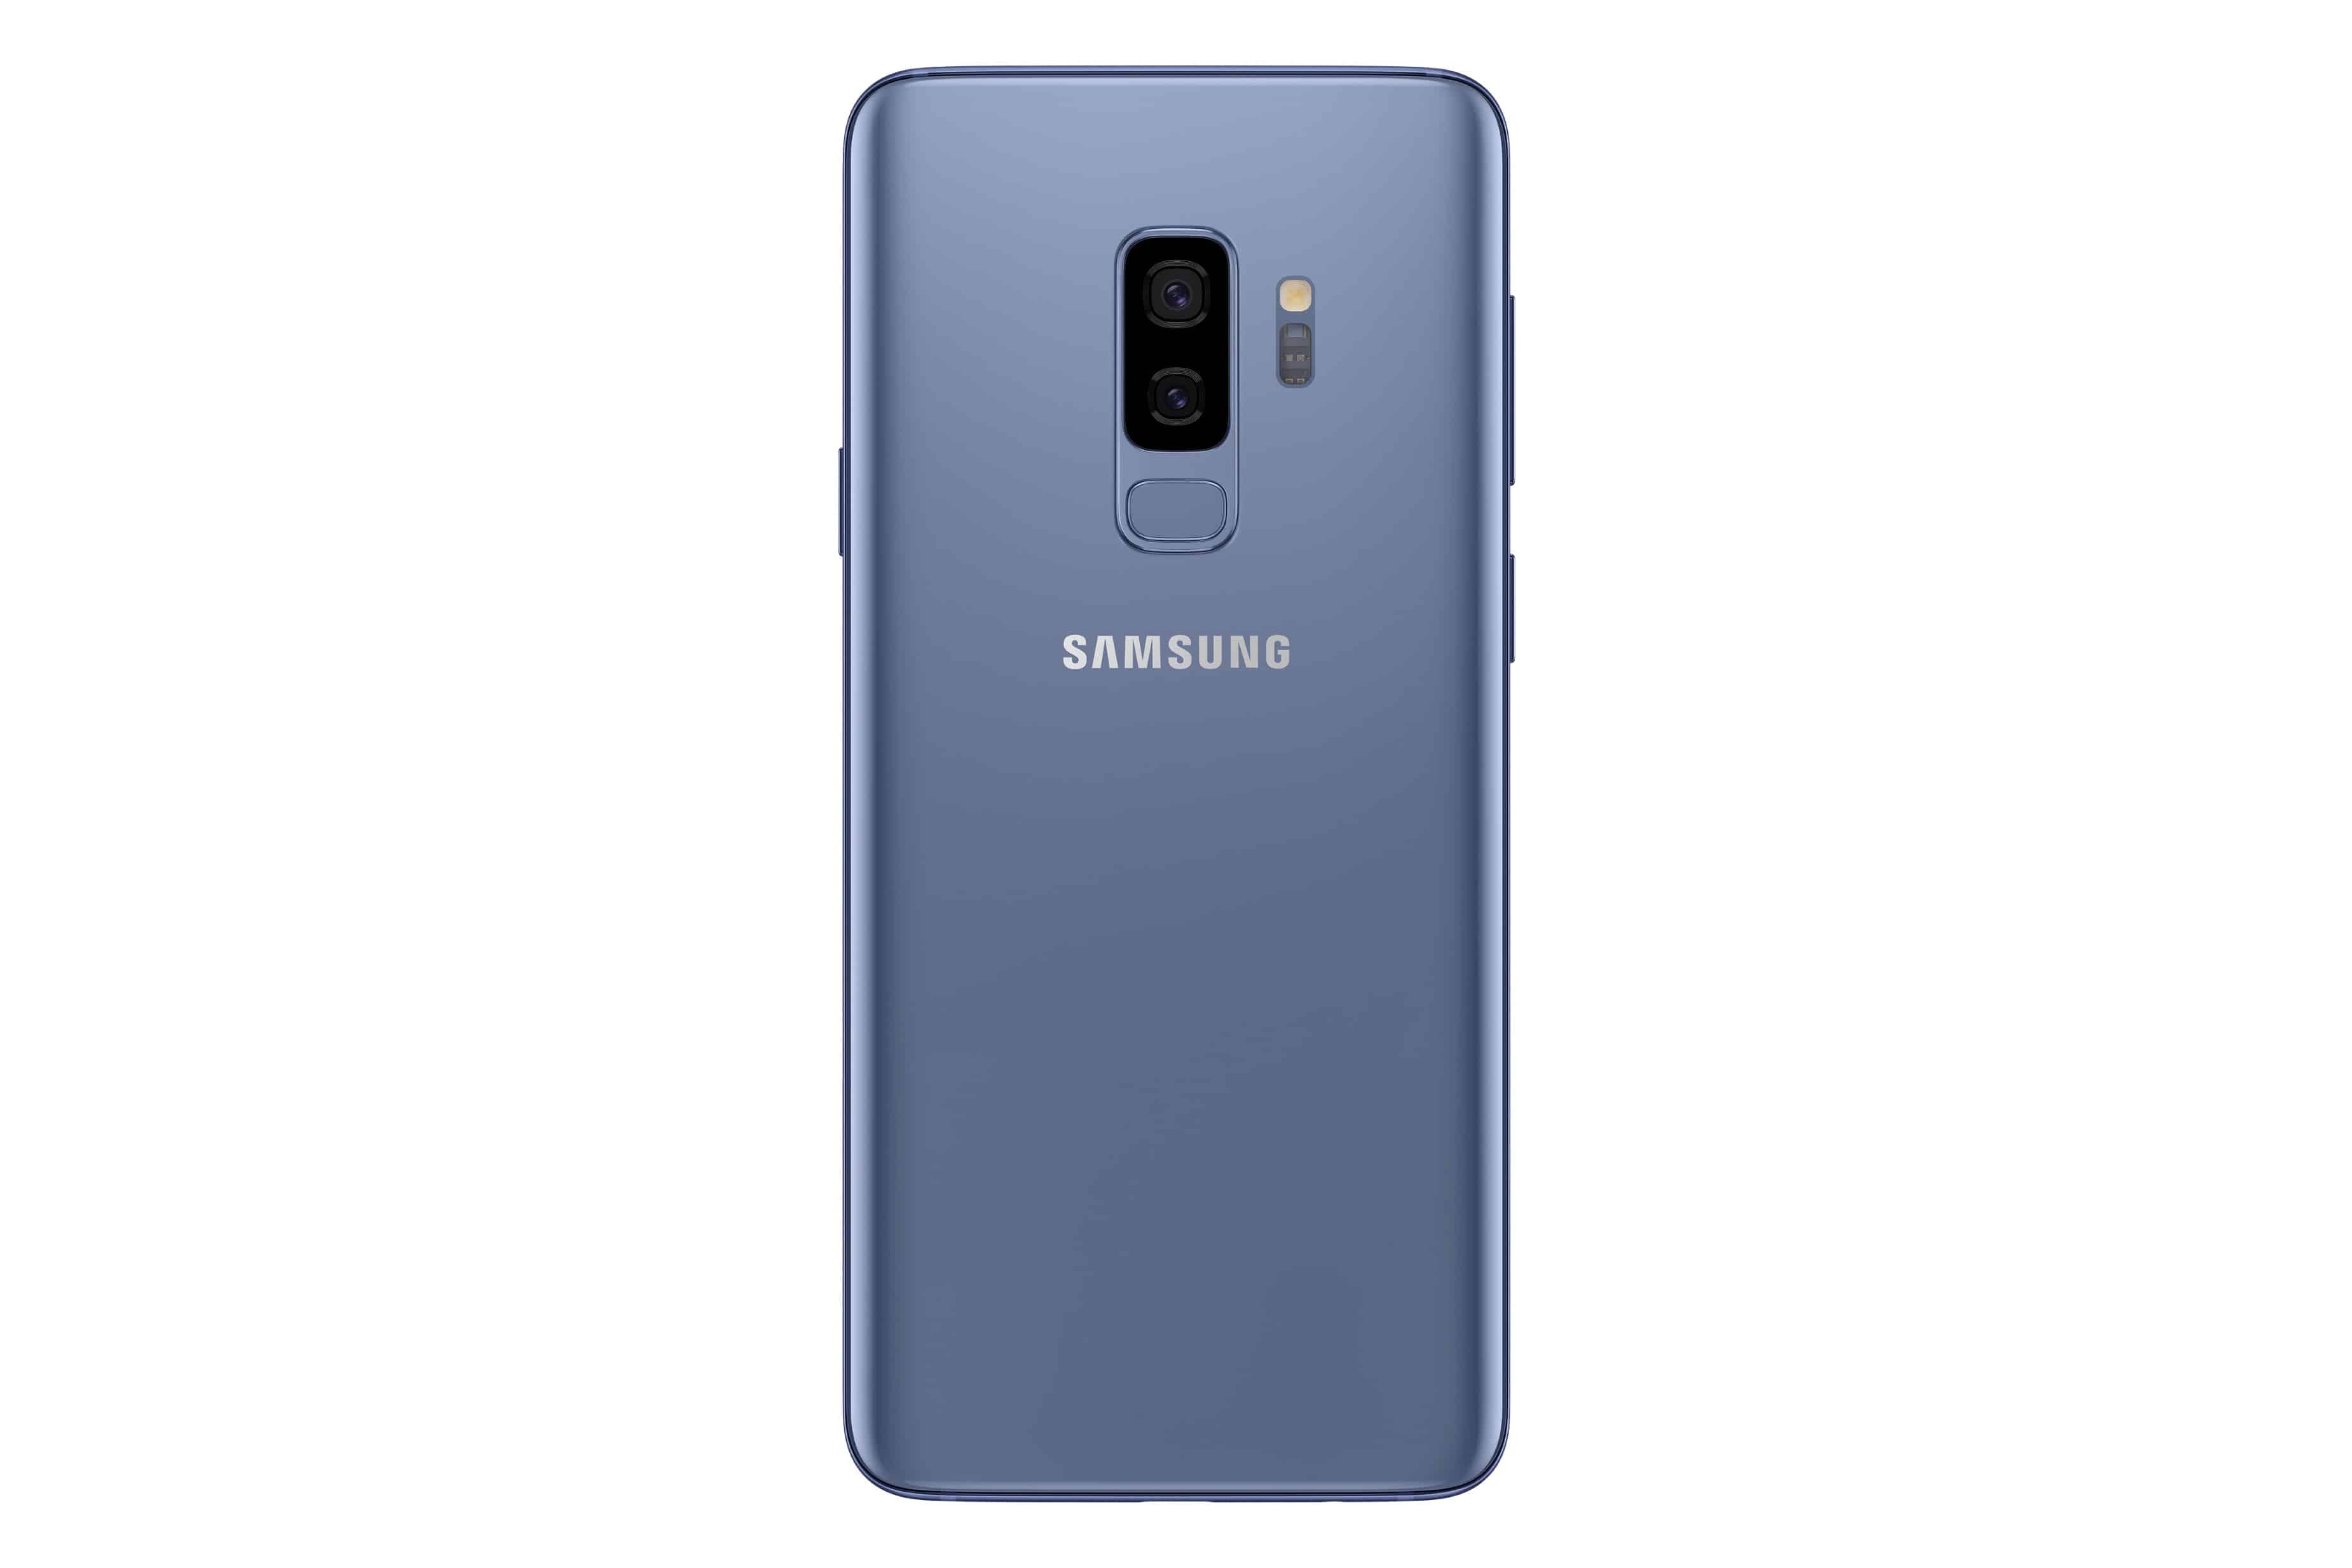 Samsung Introduces Sunrise Gold and Coral Blue Editions for the Galaxy S9 and S9+ in Qatar